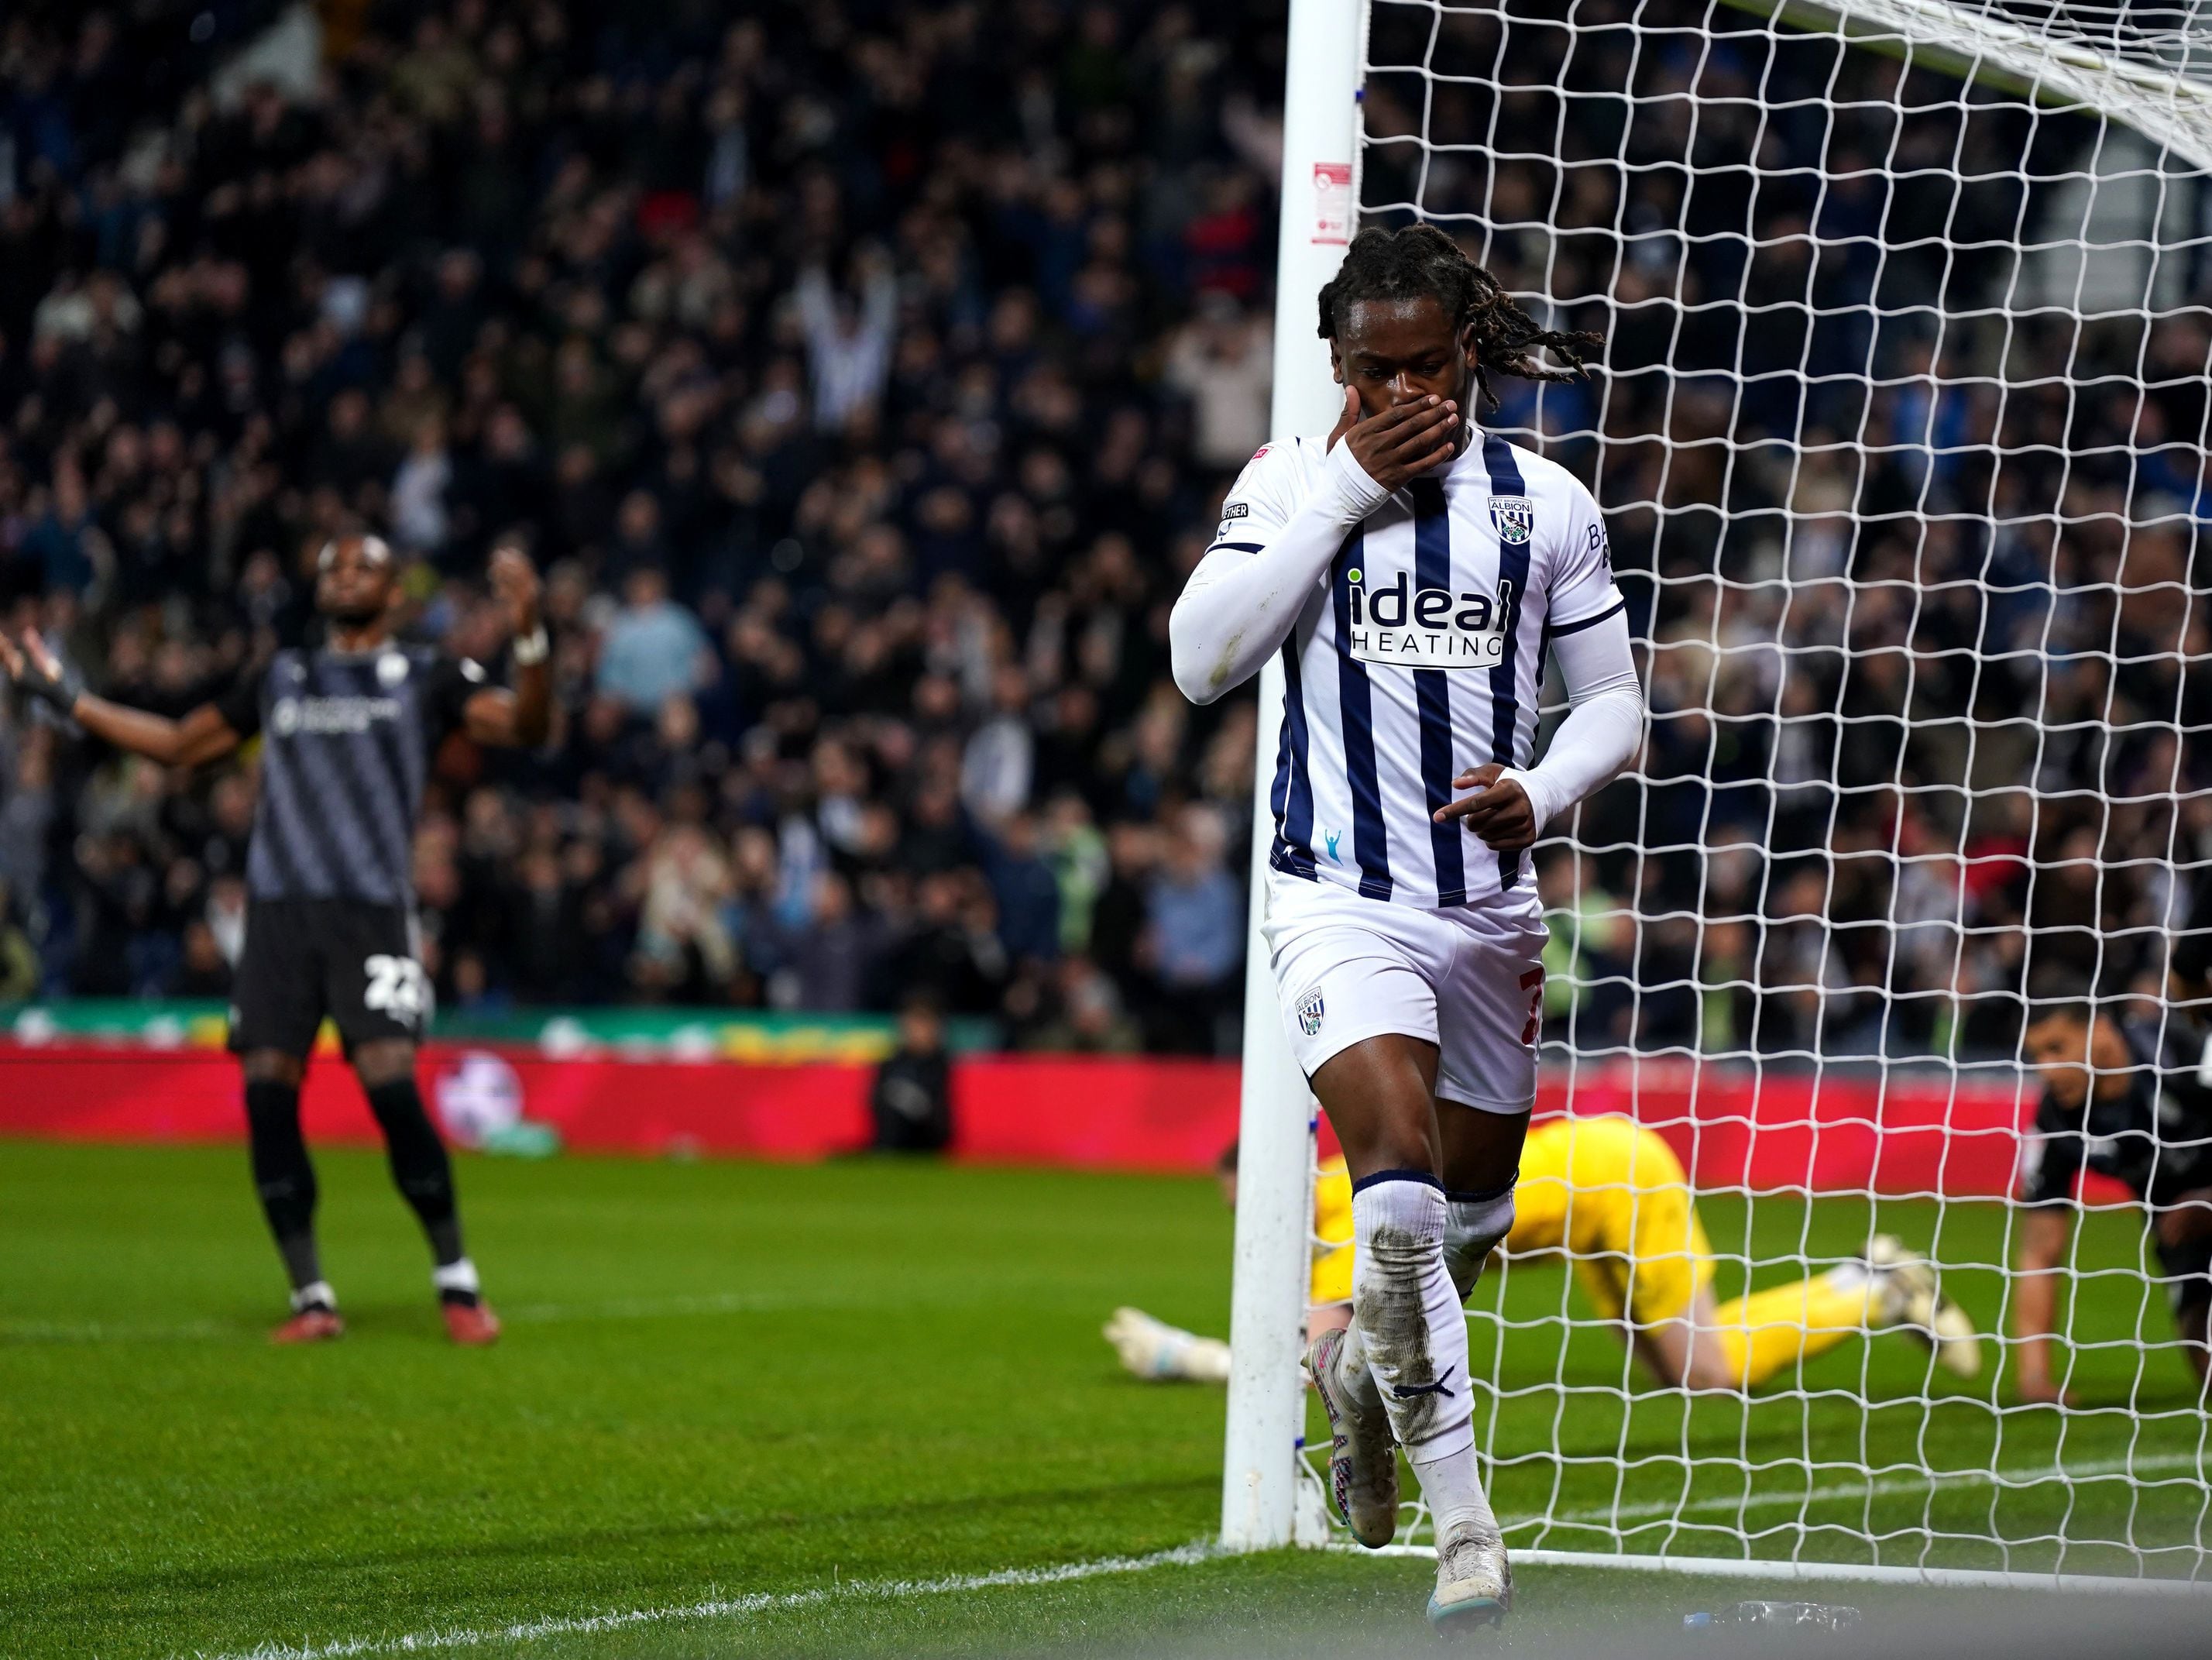 Brandon Thomas-Asante may finally be able to share West Brom's goalscoring responsibility